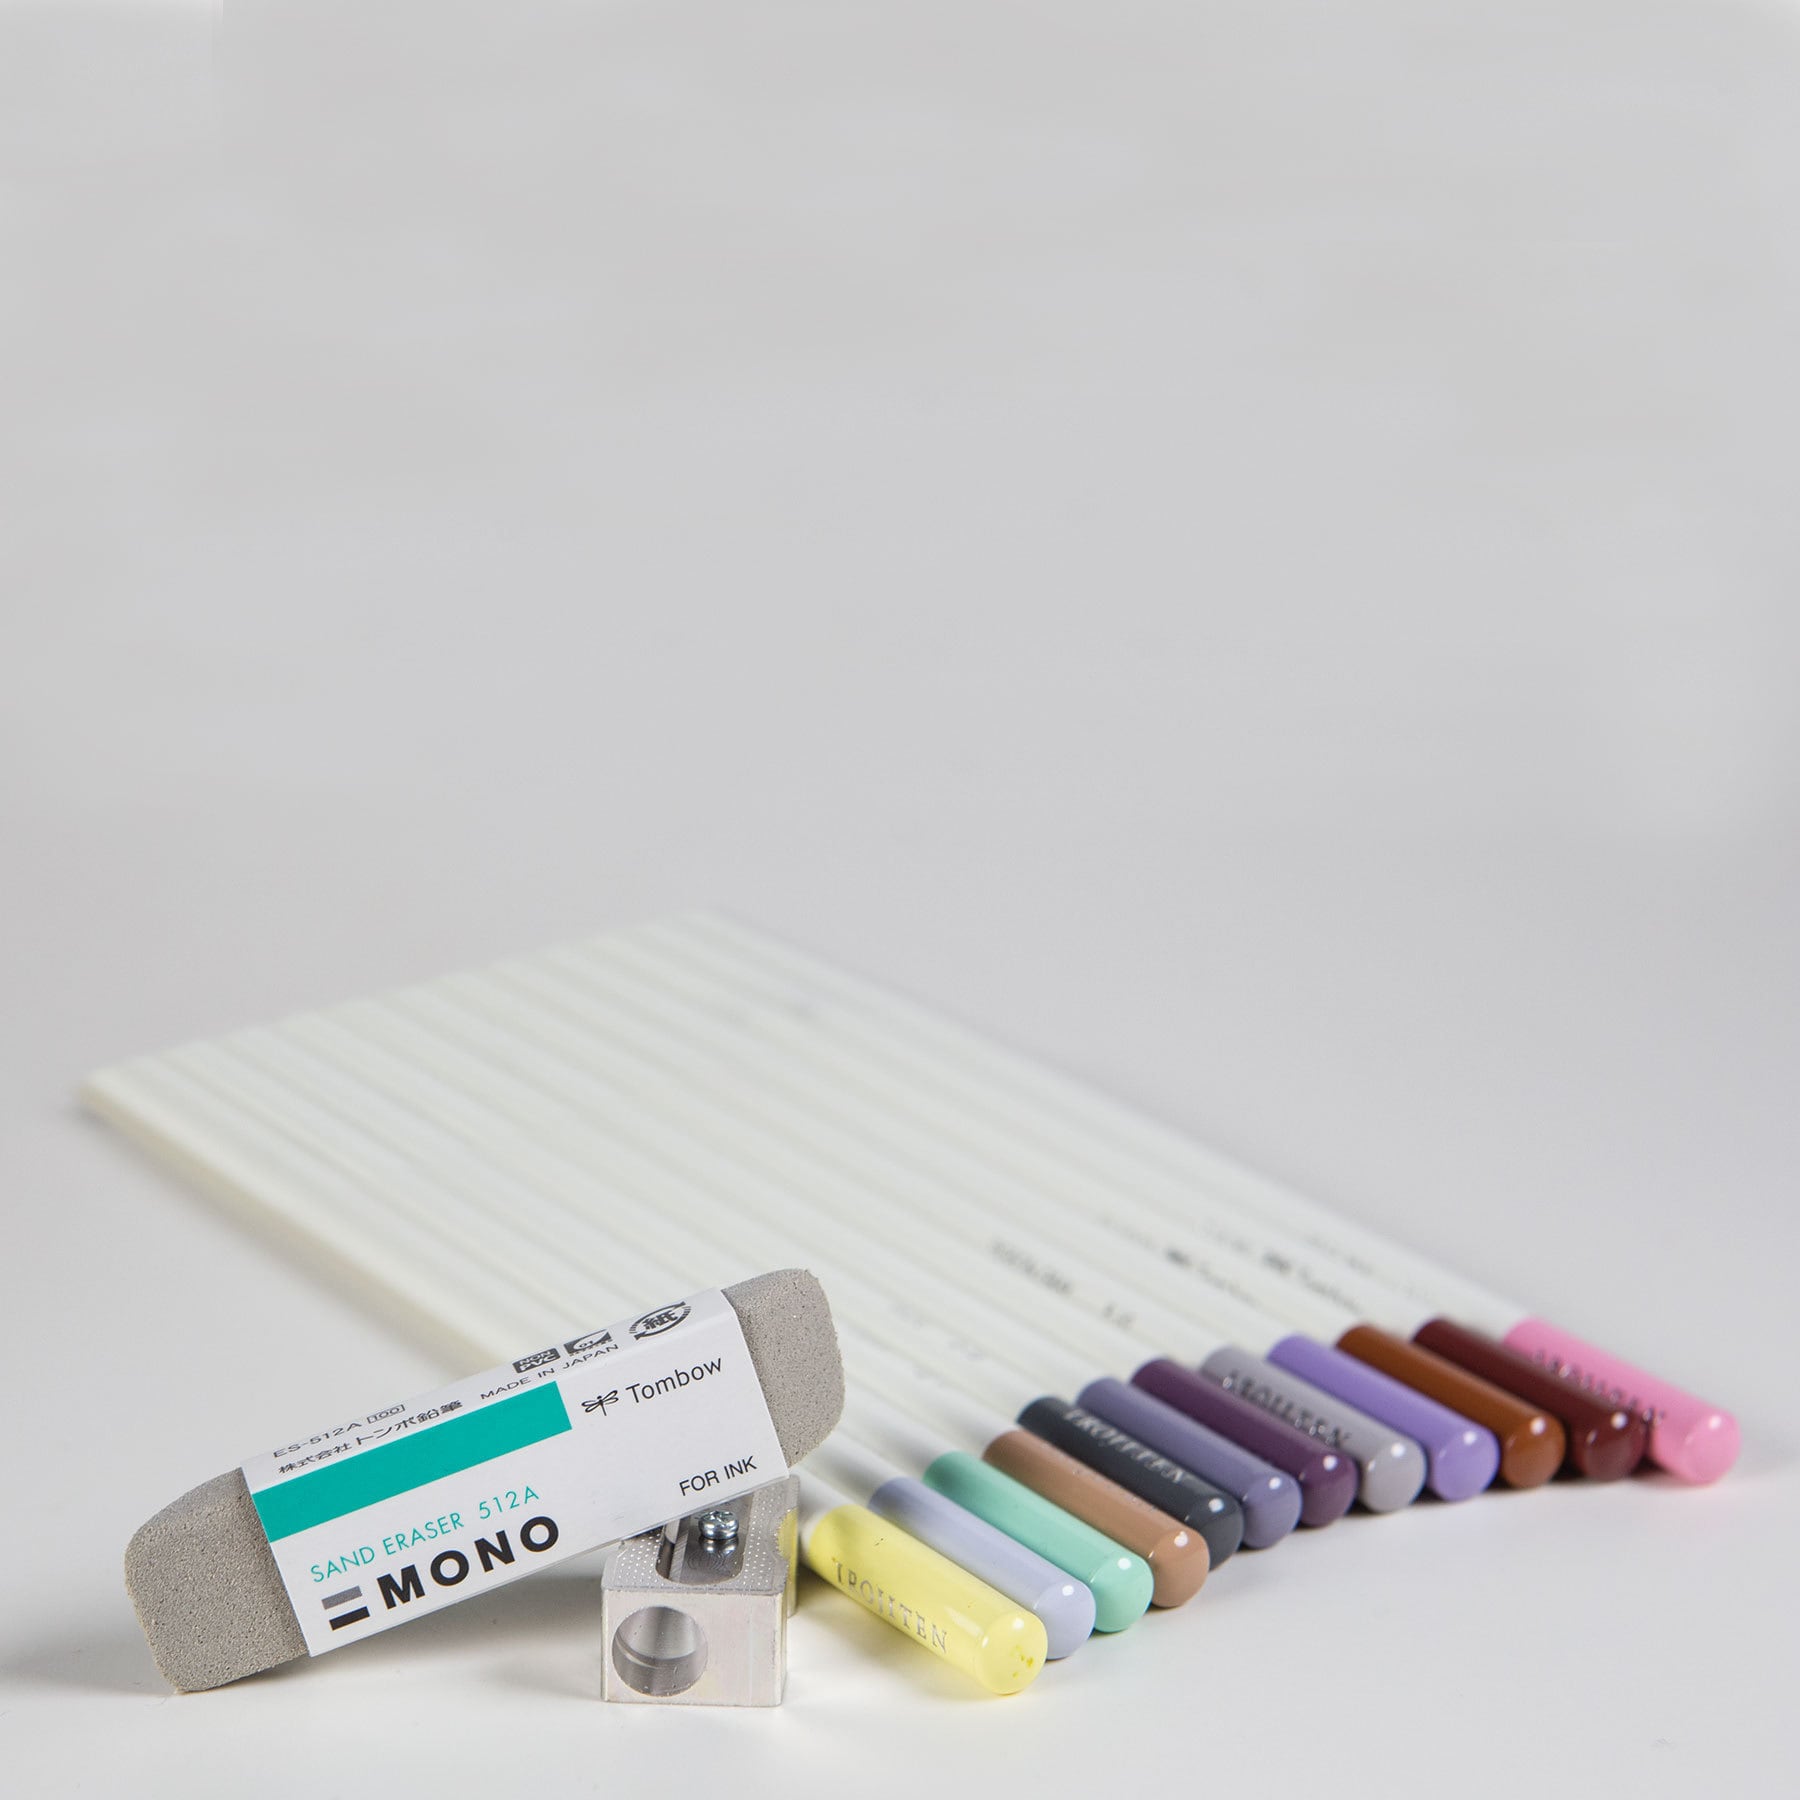 Tombow Irojiten Colored Pencil Set, Tranquil. Includes 12 Premium Colored Pencils, Sharpener, and Eraser - image 3 of 5